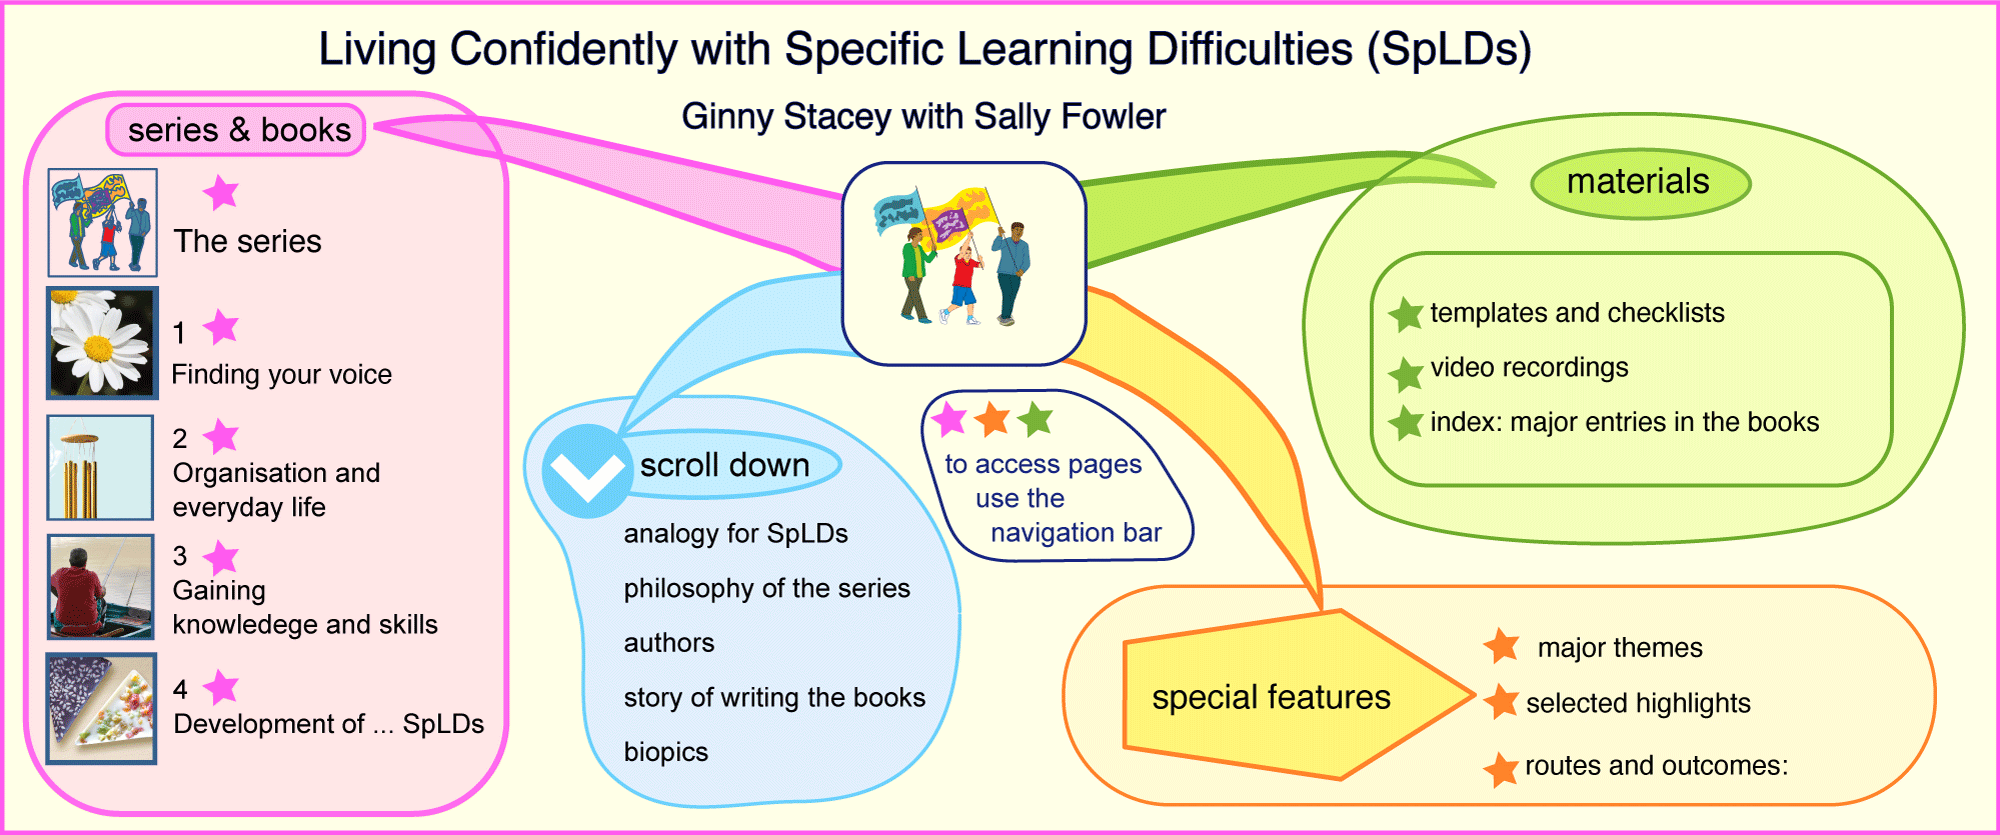 Living Confidently with Specific Learning Difficulties (SpLDs) - Mind Map